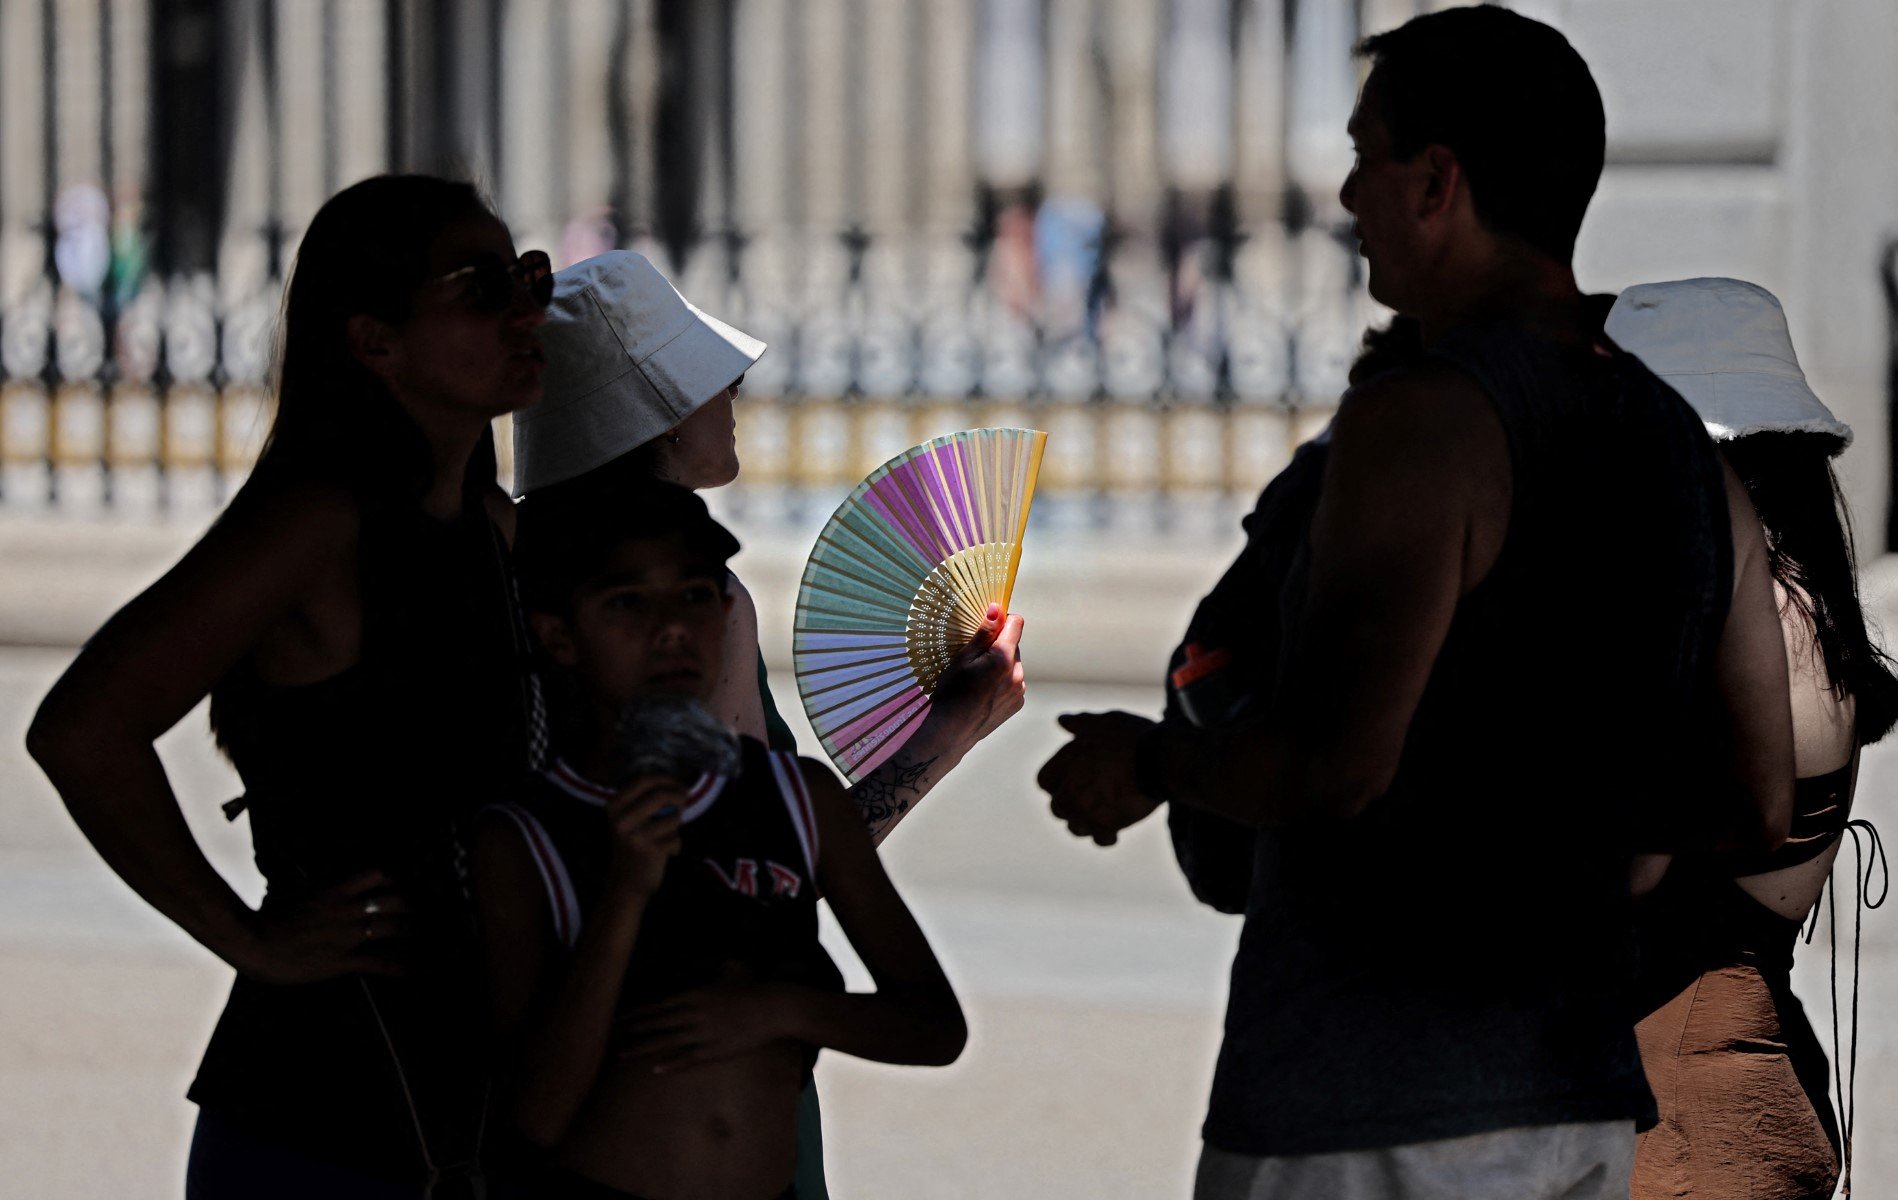 2023 was second-hottest year on record in Spain: weather agency thumbnail